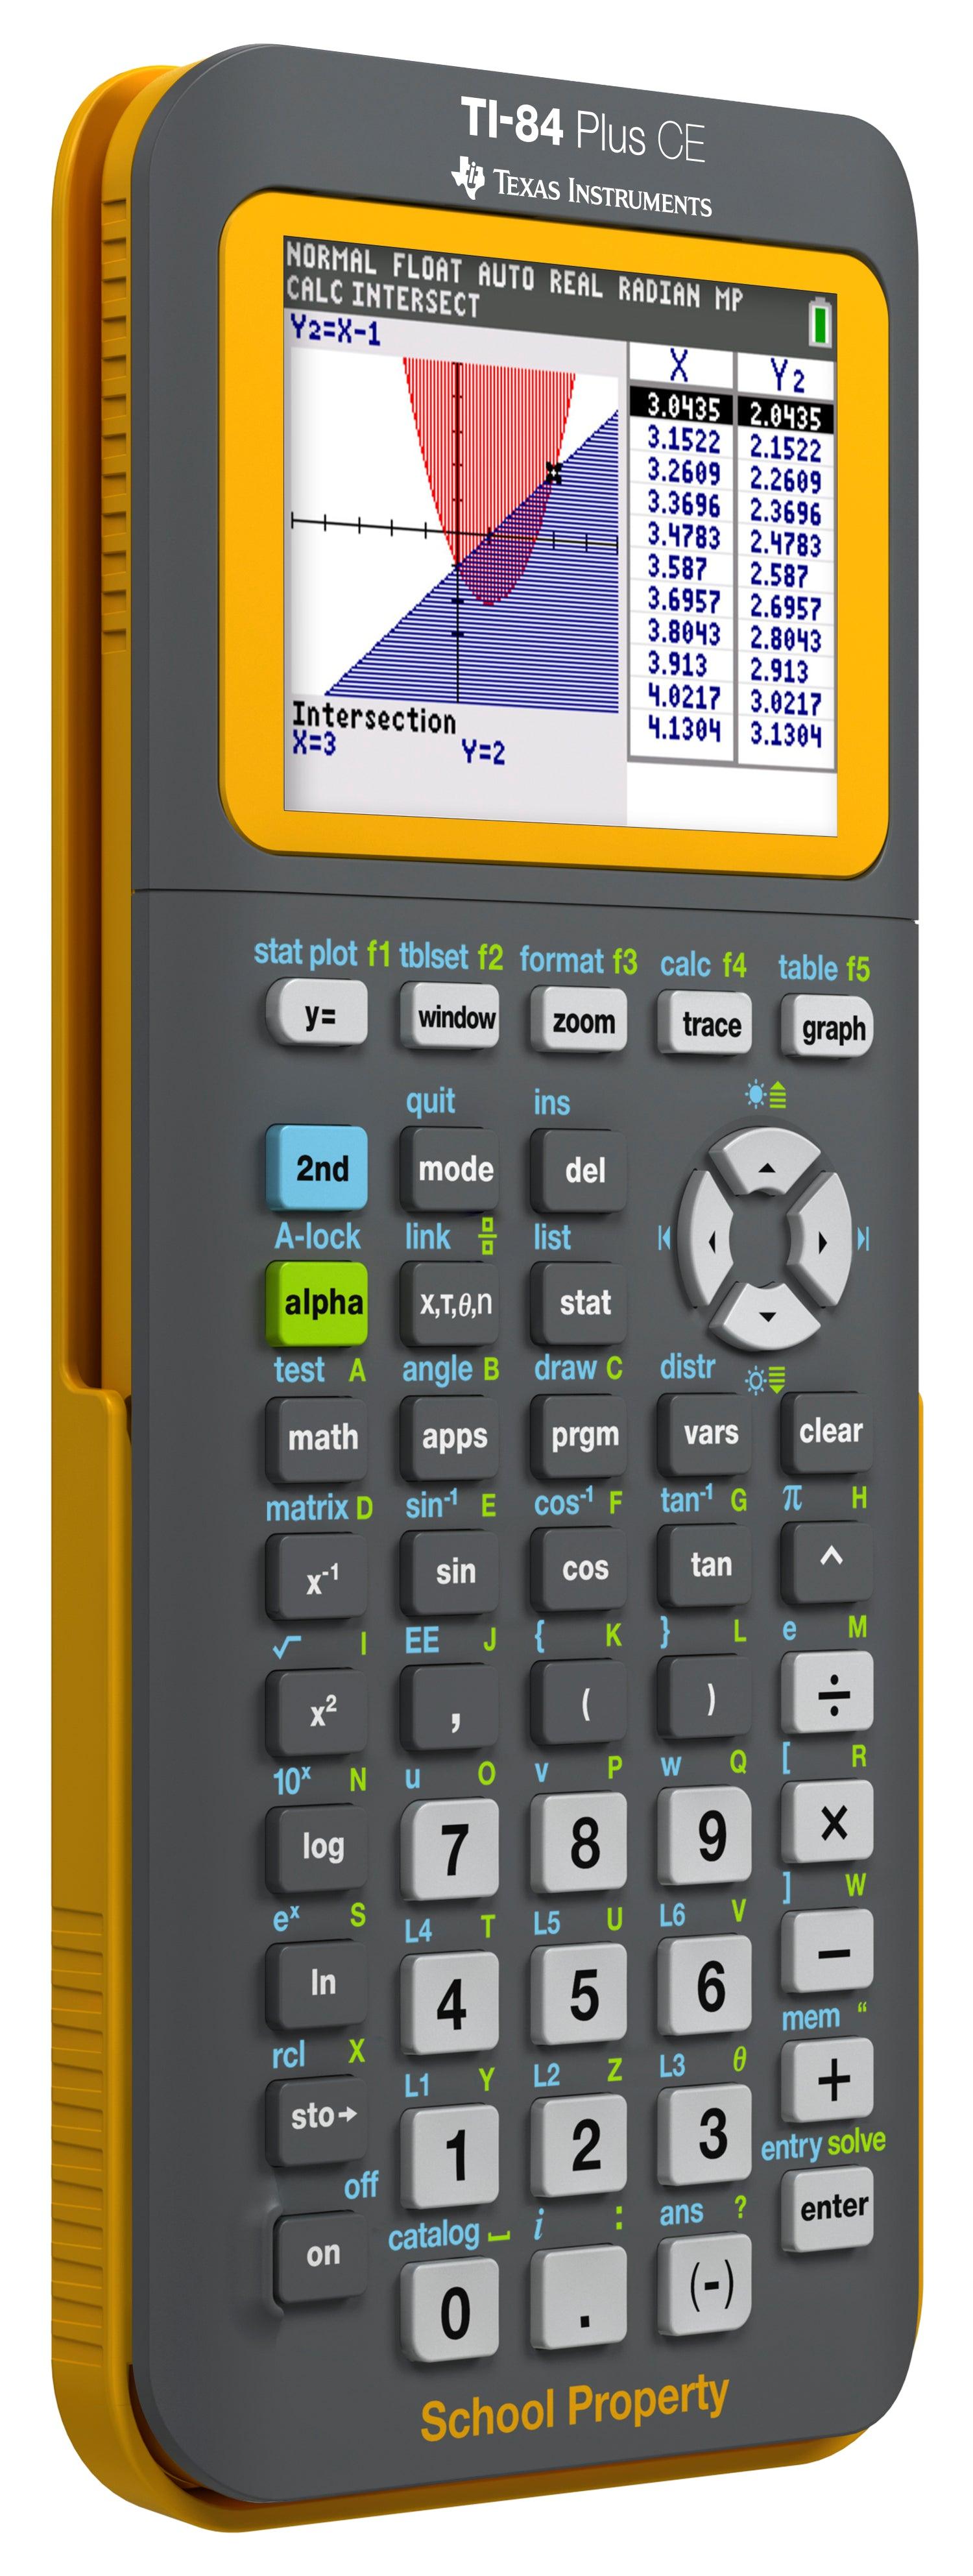 Ti-84 Plus CE Remote Learning Teacher Pack - Underwood Distributing Co.